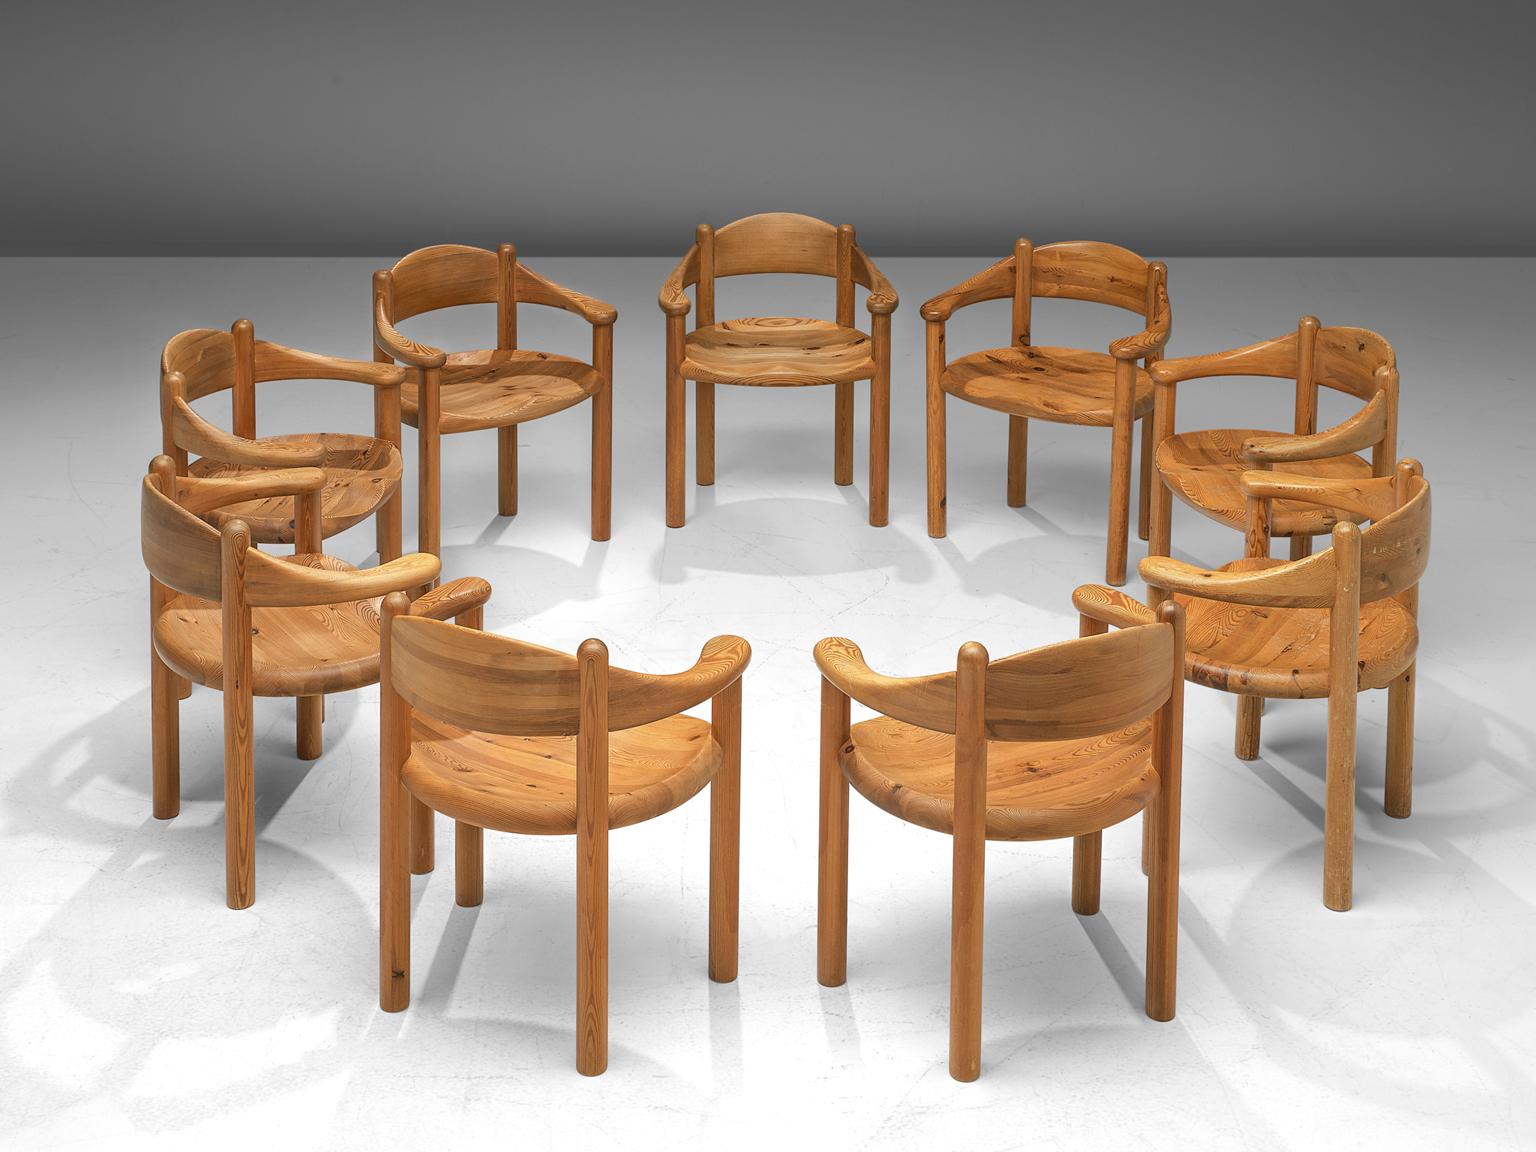 Rainer Daumiller for Hirtshals Savvaerk, set of nine armchairs, pine, Denmark 1970s. 

Beautiful set of nine organic and natural armchairs in solid pine. A simplistic design with a round seating and all attention for the natural expression and